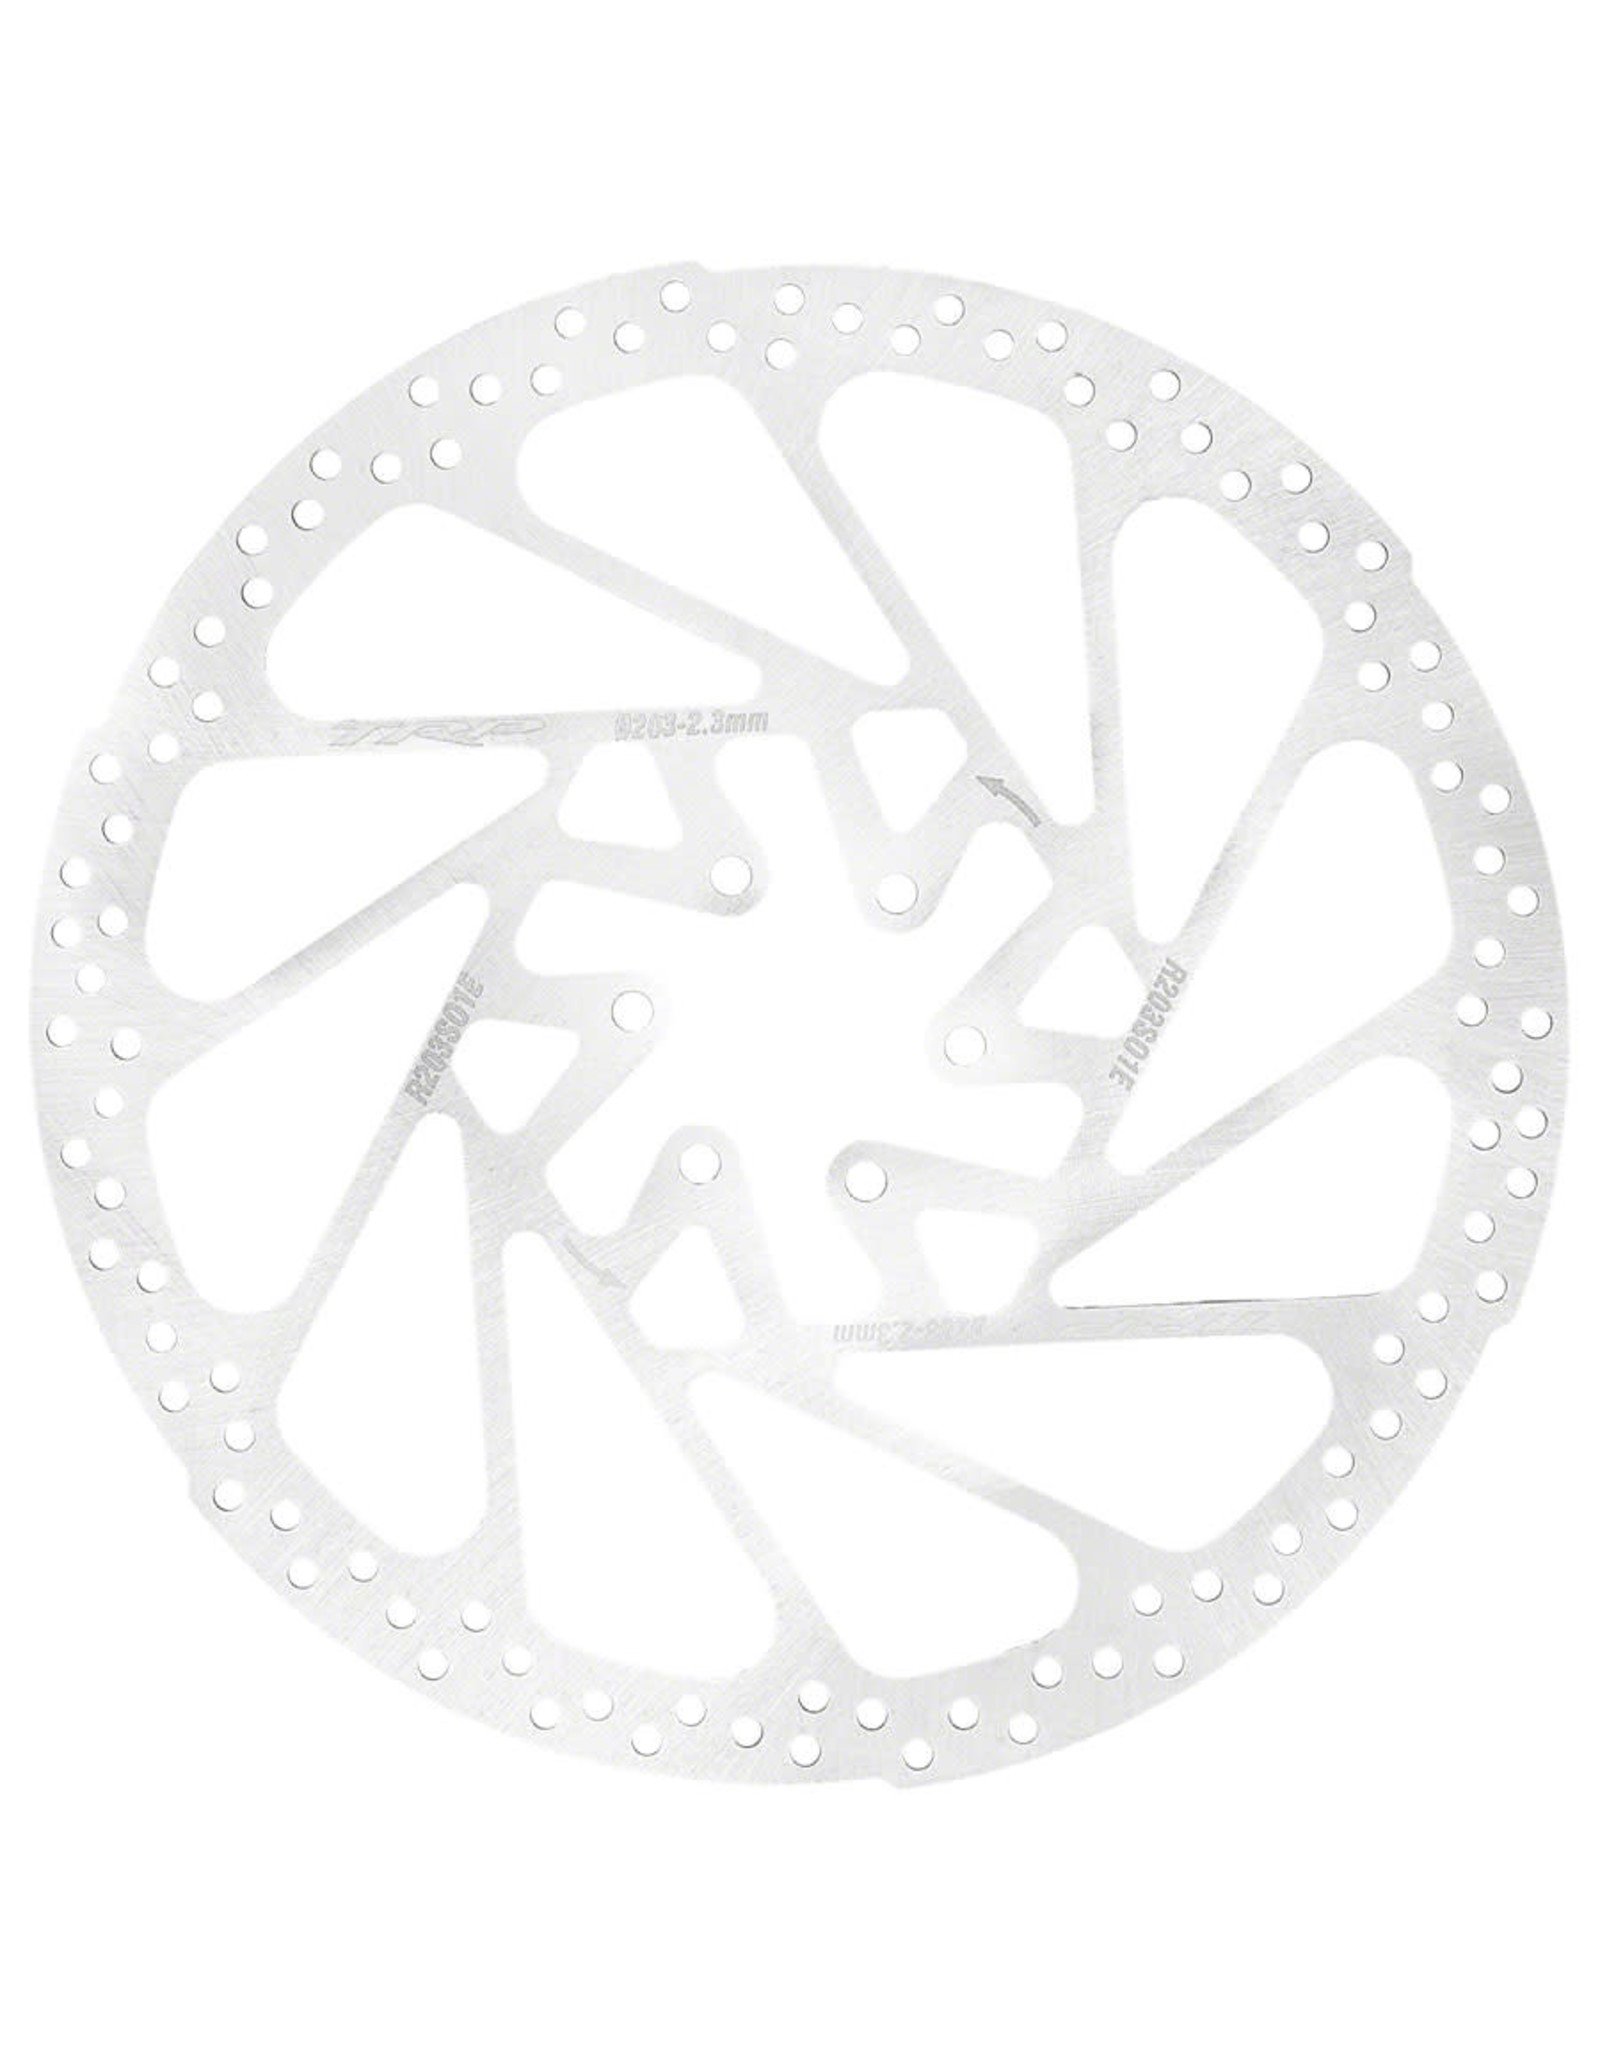 TRP R1 Disc Rotor 2.3mm Thick S01E Rust-Blocker Treatment - Two